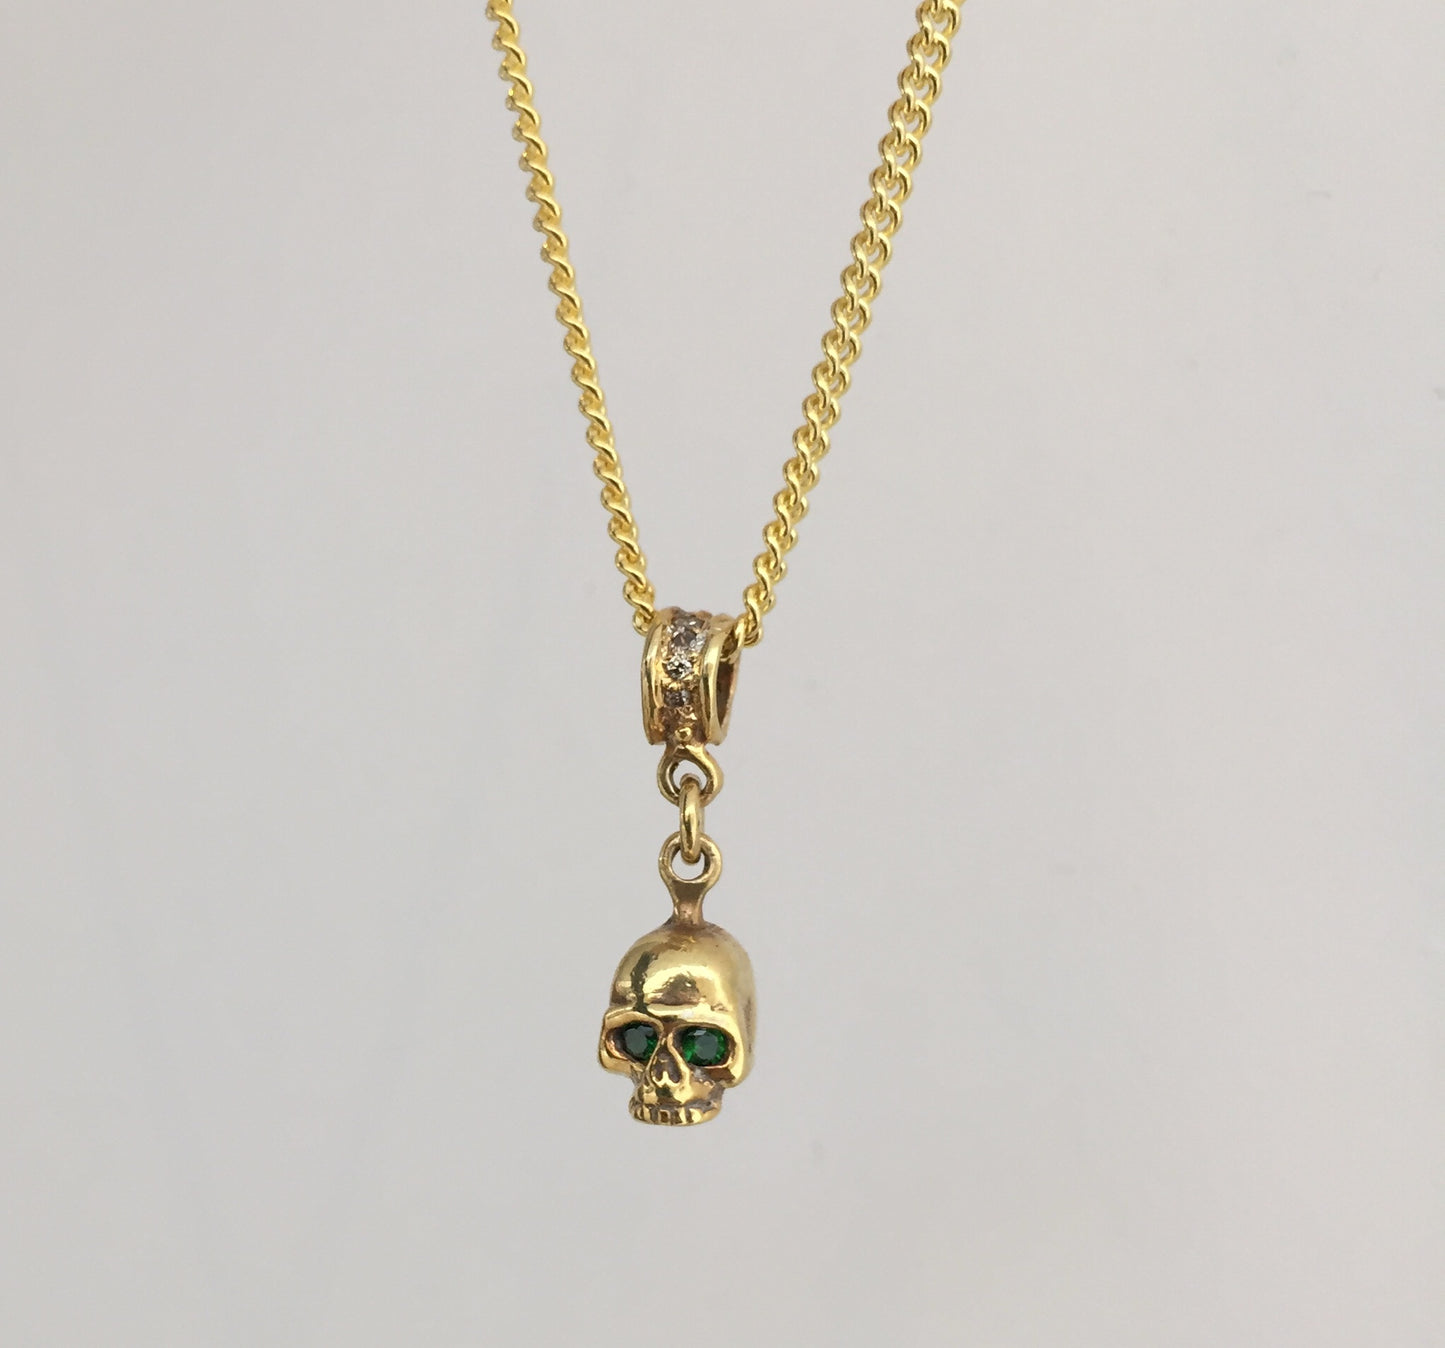 Necklace - Golden Skull with Emeralds and champagne diamonds by RP